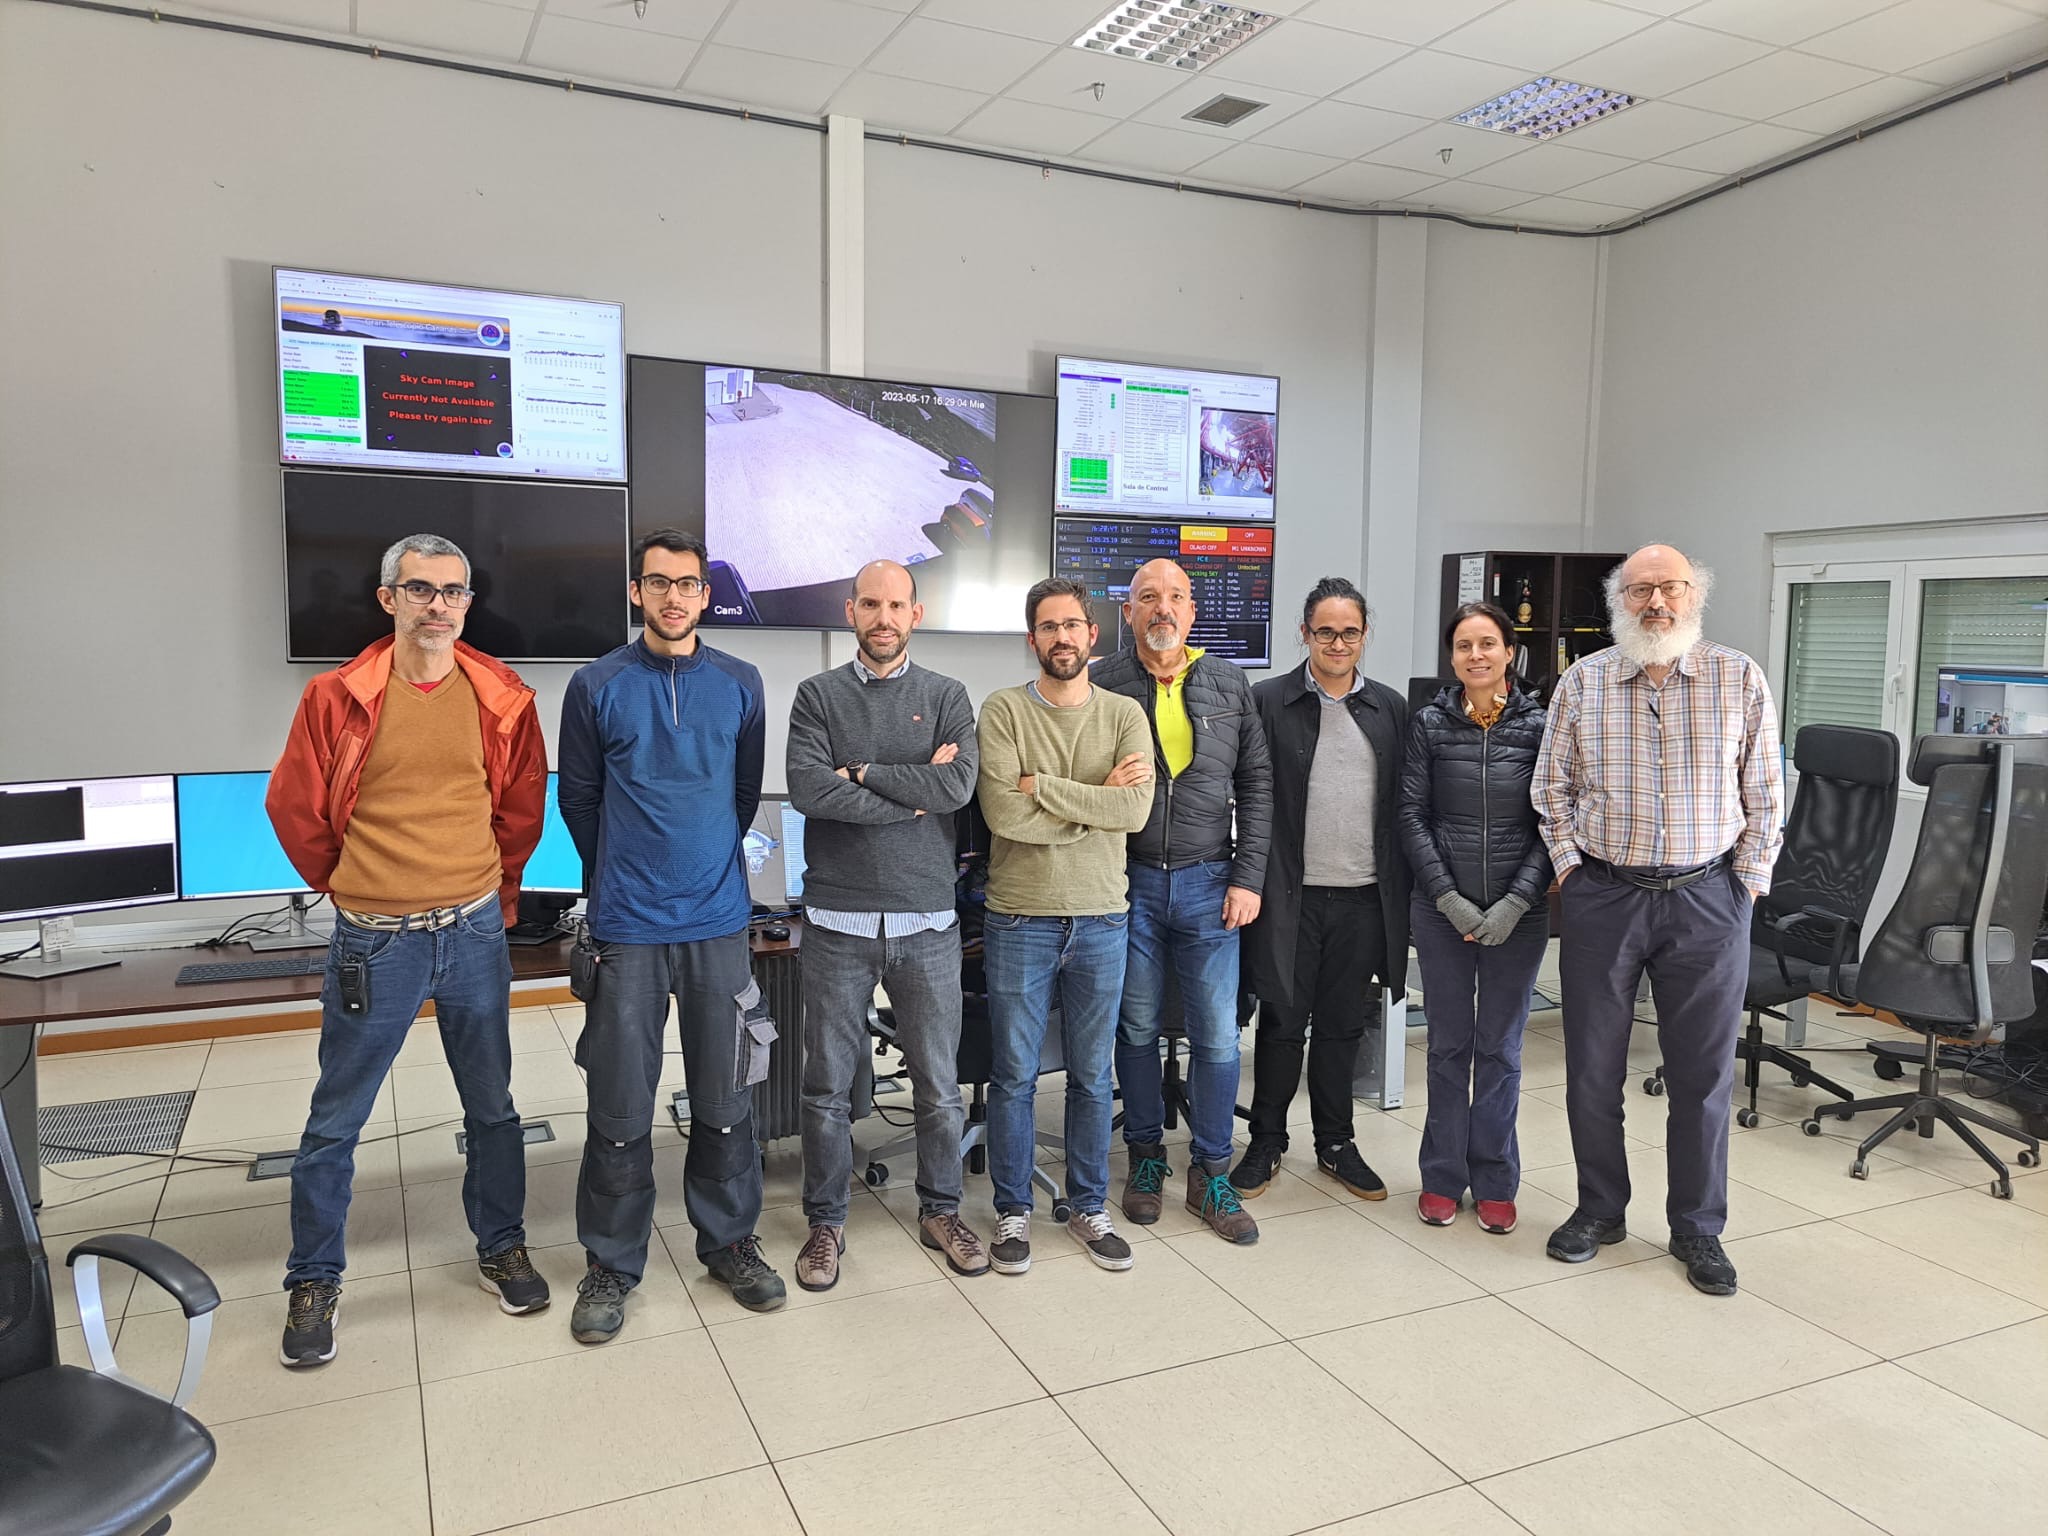 GTC-MAAT kick-off meeting on the OSIRIS Mask Loader upgrade & OSIRIS+MAAT Optics held at the GTC telescope on May 17-28.
Participants (from left to right): Sergio Fernández (Instrumentation Head, GTC), Kilian Henríquez (Mechanical Engineer, GTC), Gaizka Mendieta (Project Manager, IDOM), Rubén Sanquirce (Mechanical Engineer, IDOM),  Gabriel Gómez (Support Astronomer, GTC),  Alexander Díaz (Mechanical Engineer, IDOM), Manuela Abril (Instrument Specialist & PM for MAAT, GTC) & Robert Content (Optical Scientist, AAO-MQ). Picture taken by Francisco Prada (MAAT) at the GTC Control Room.
IDOM is a Spanish company hired by MAAT to implement the upgrade of the OSIRIS Mask Loader. Robert Content is our MAAT optical designer.